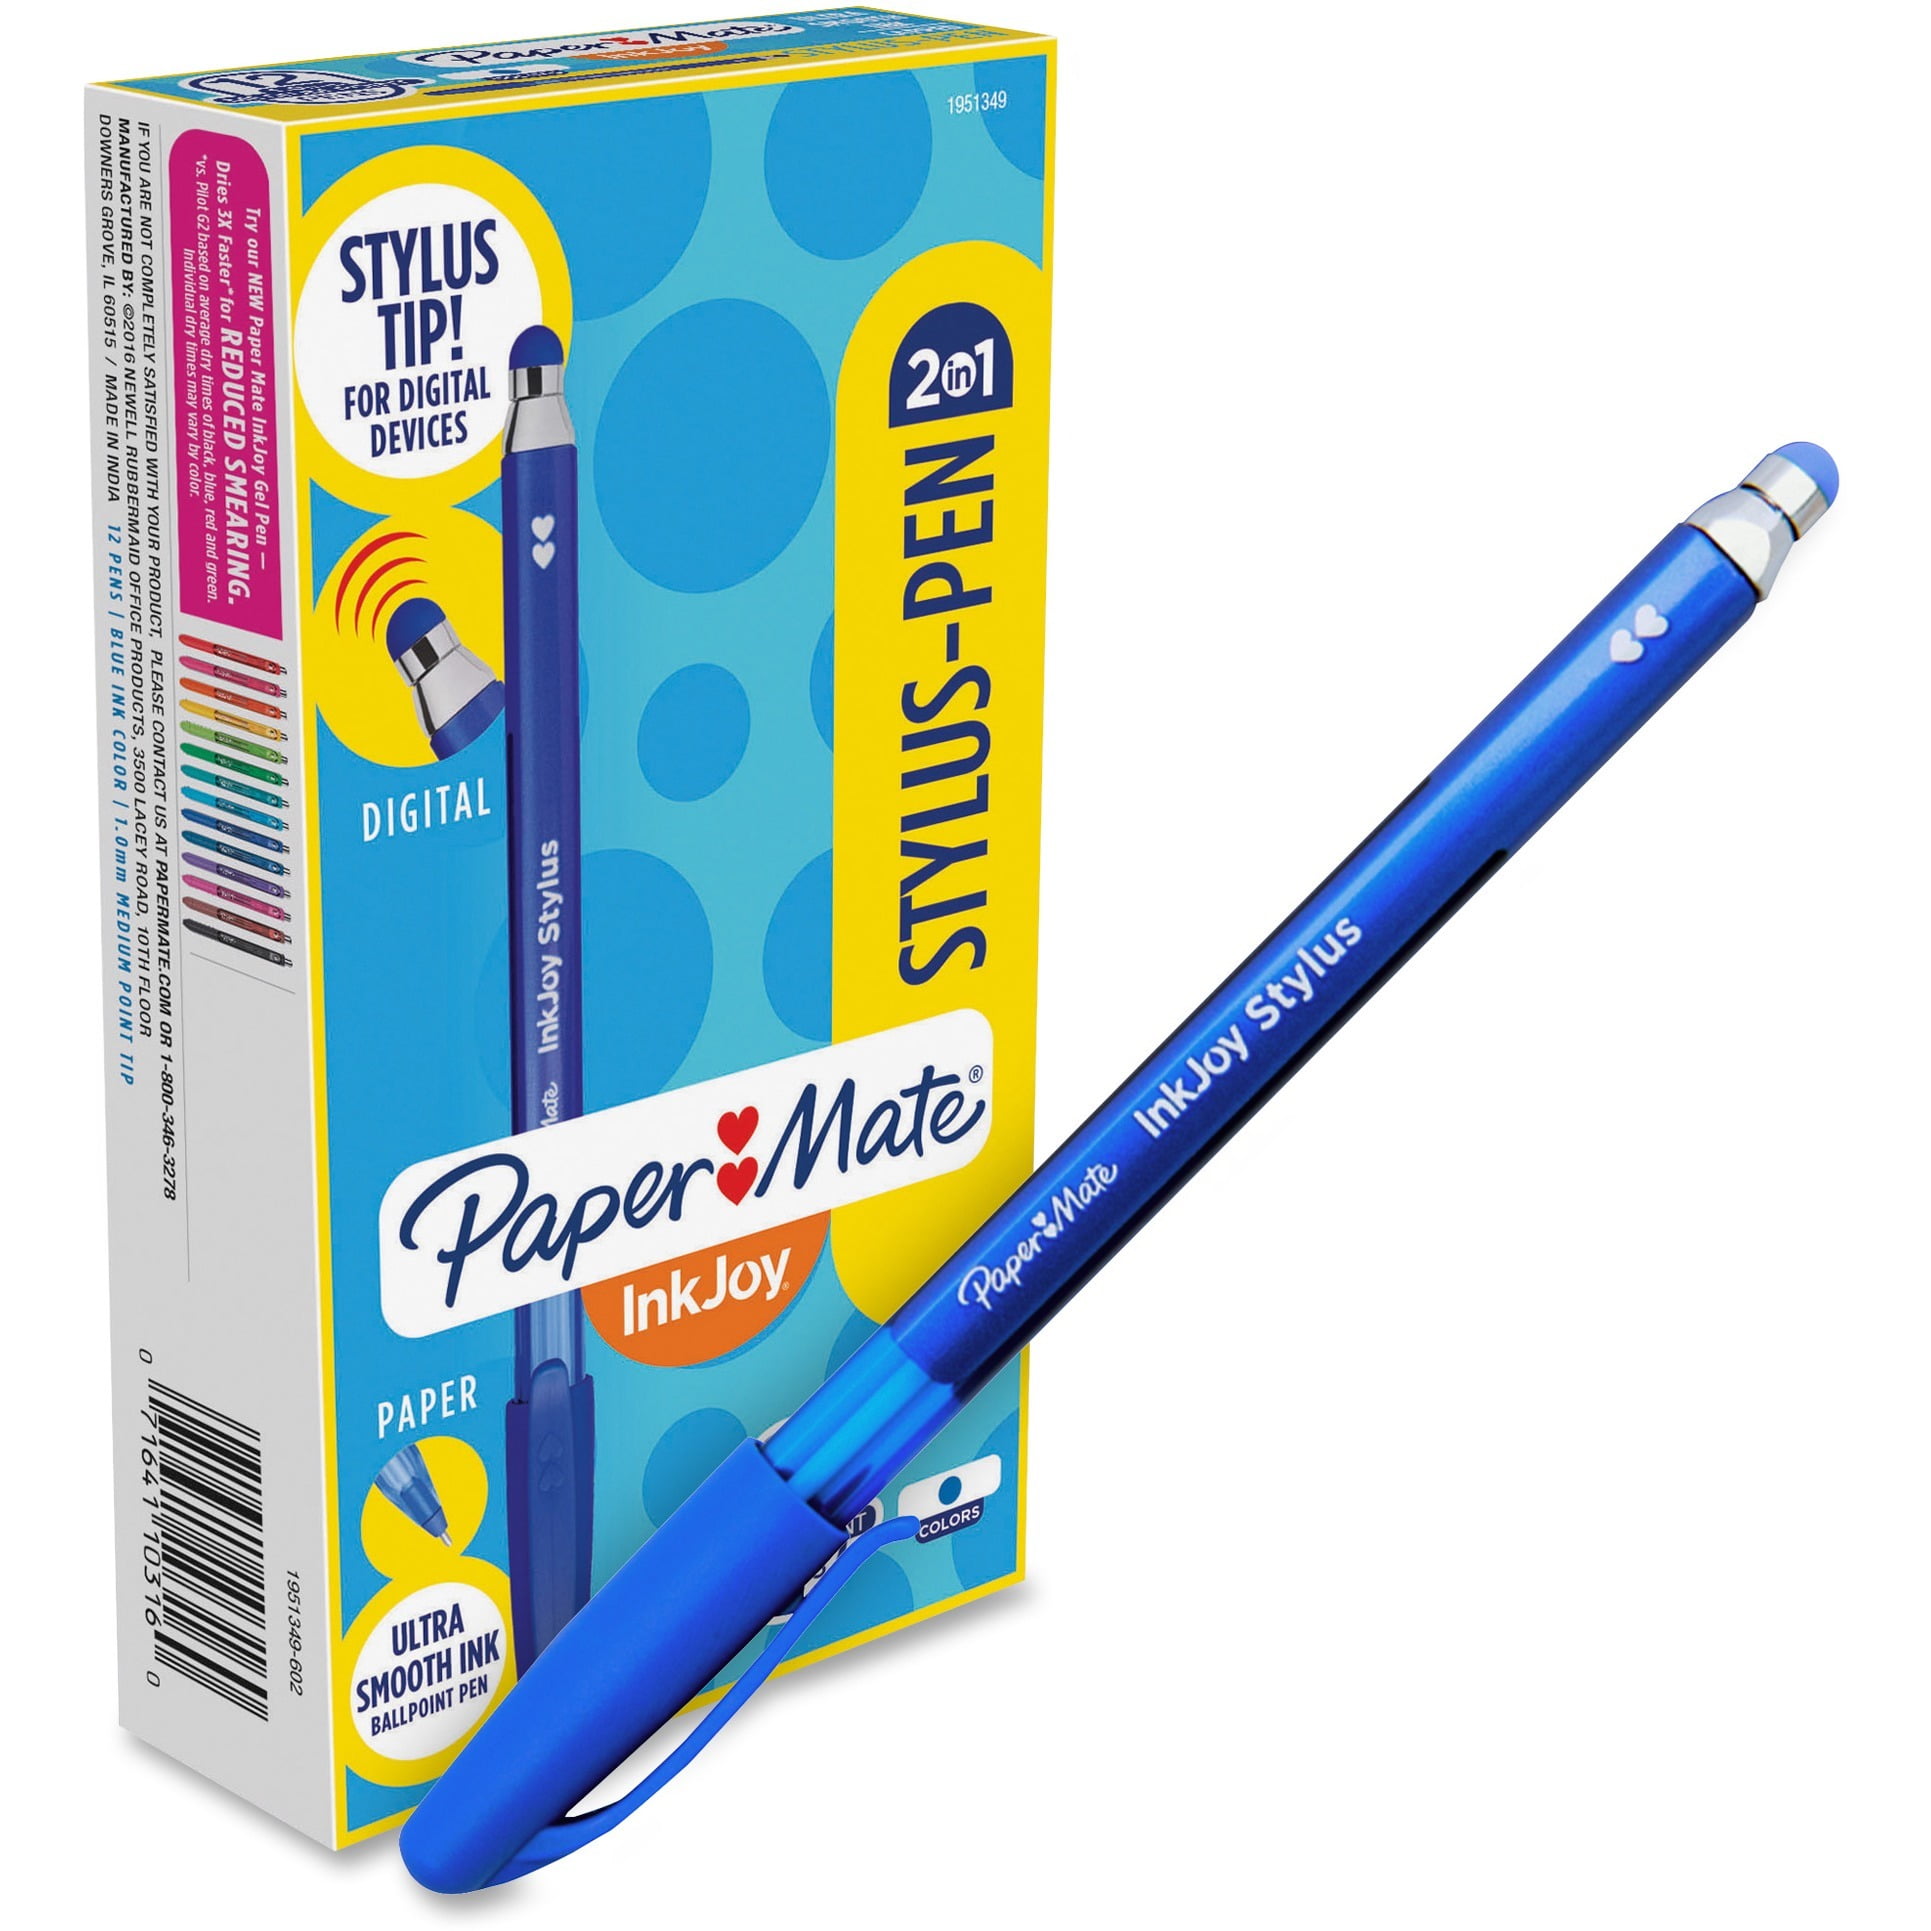 Paper Mate InkJoy 100 Stick Stylus Ballpoint Pens 1mm Assorted 071641085541 for sale online 